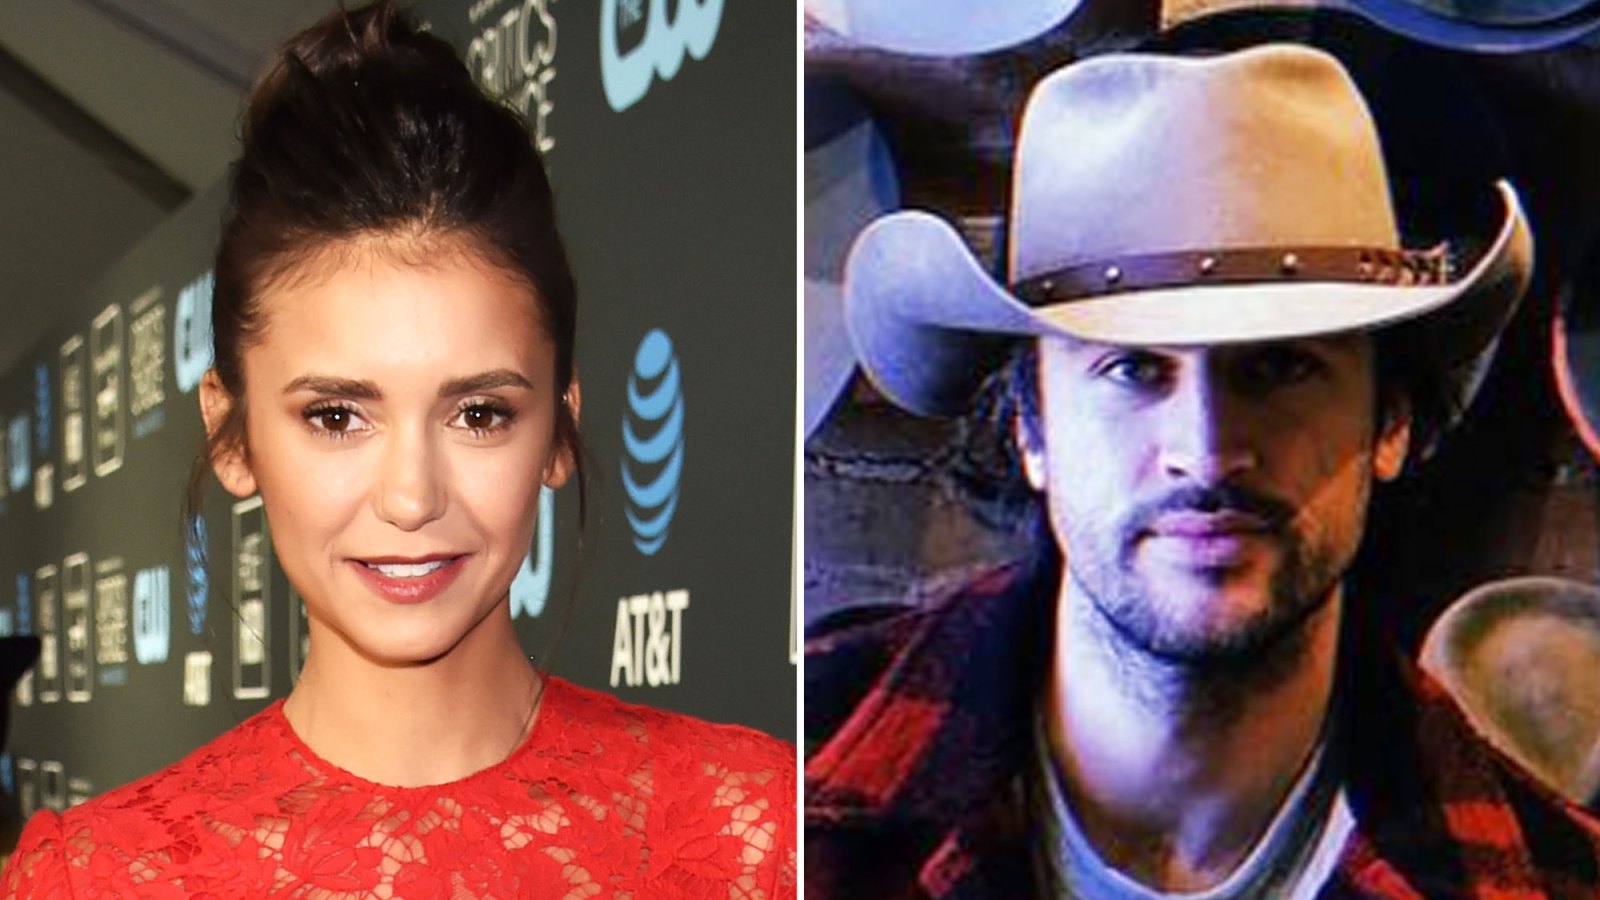 Nina Dobrev Spotted Kissing Grant Mellon at Super Bowl Parties More Than a Year After Glen Powell Split